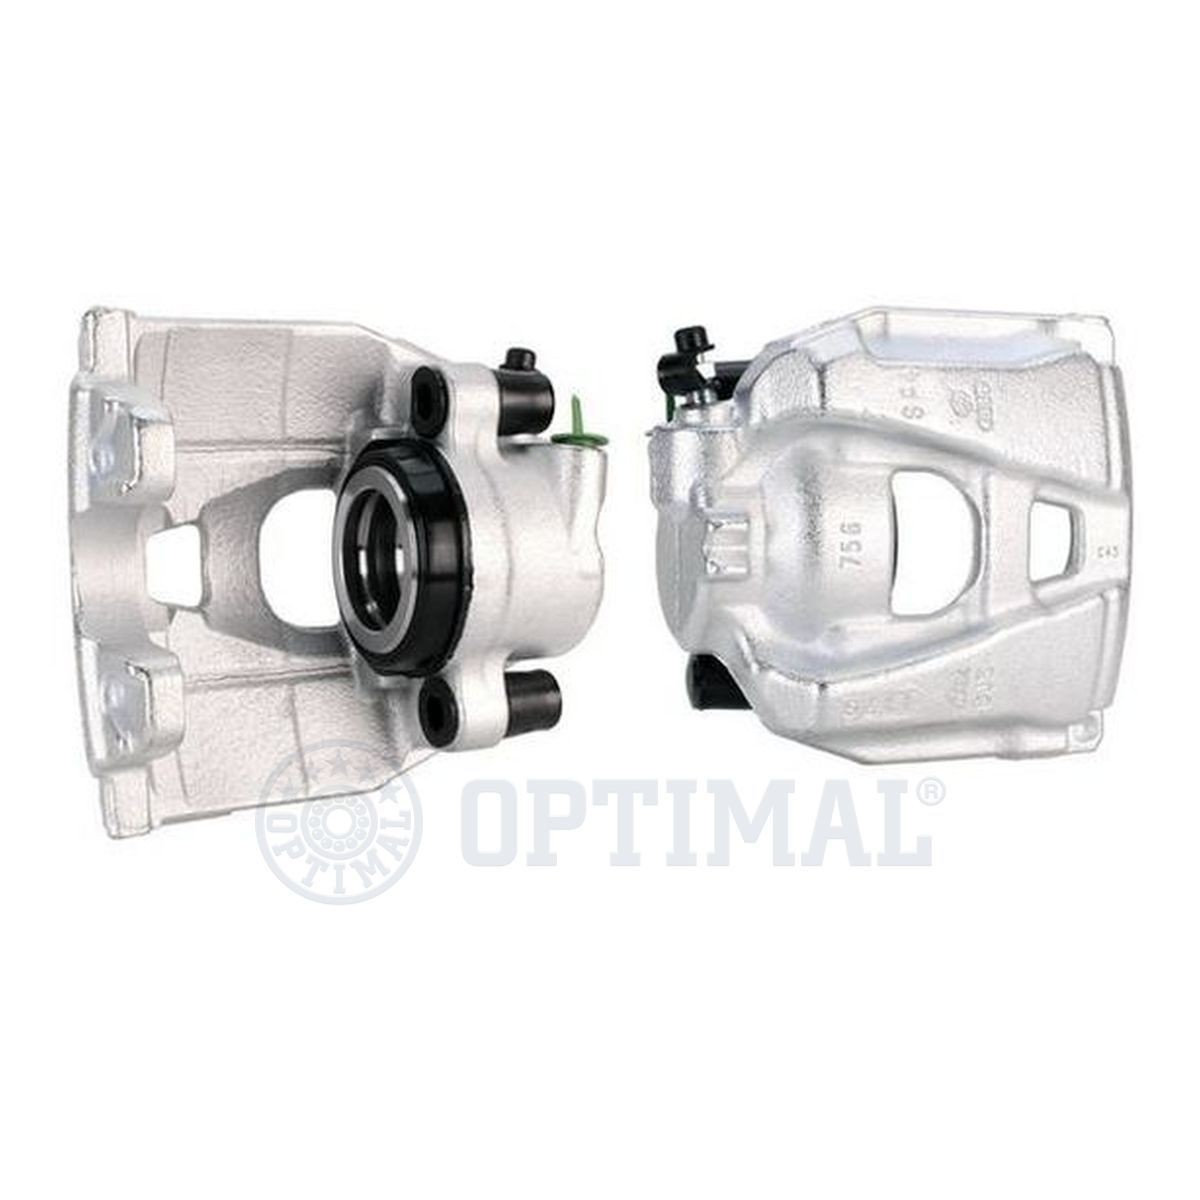 OPTIMAL BC-1362R Brake caliper Cast Steel, Front Axle Right, without holding frame